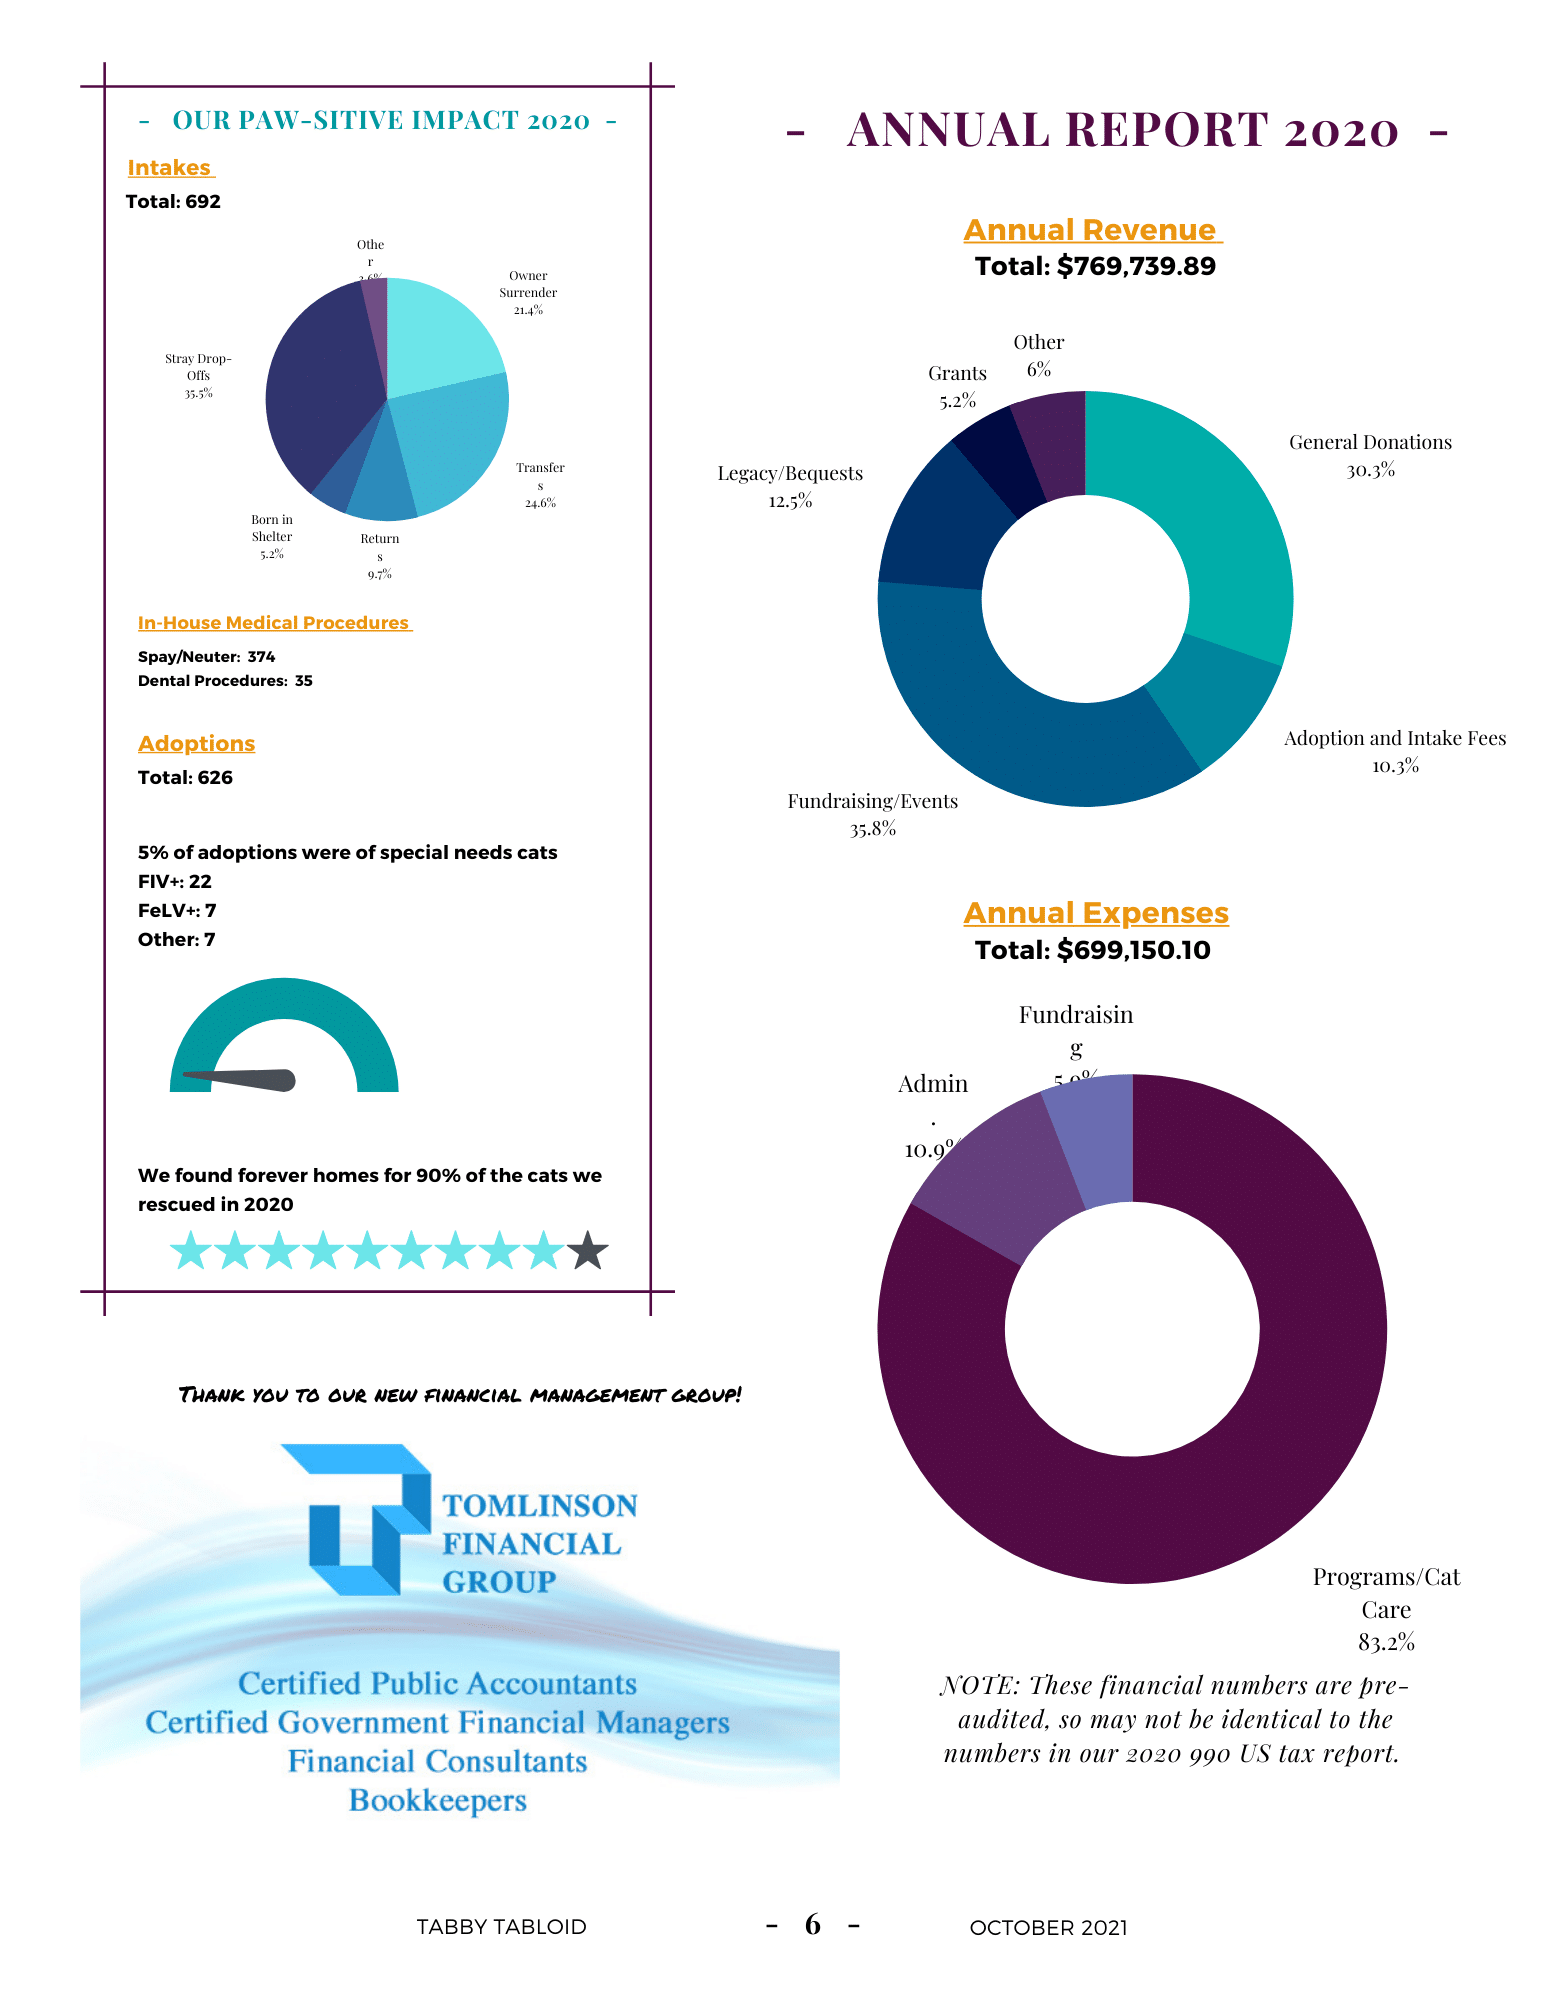 Annual Report 2020 (from TT 2021)